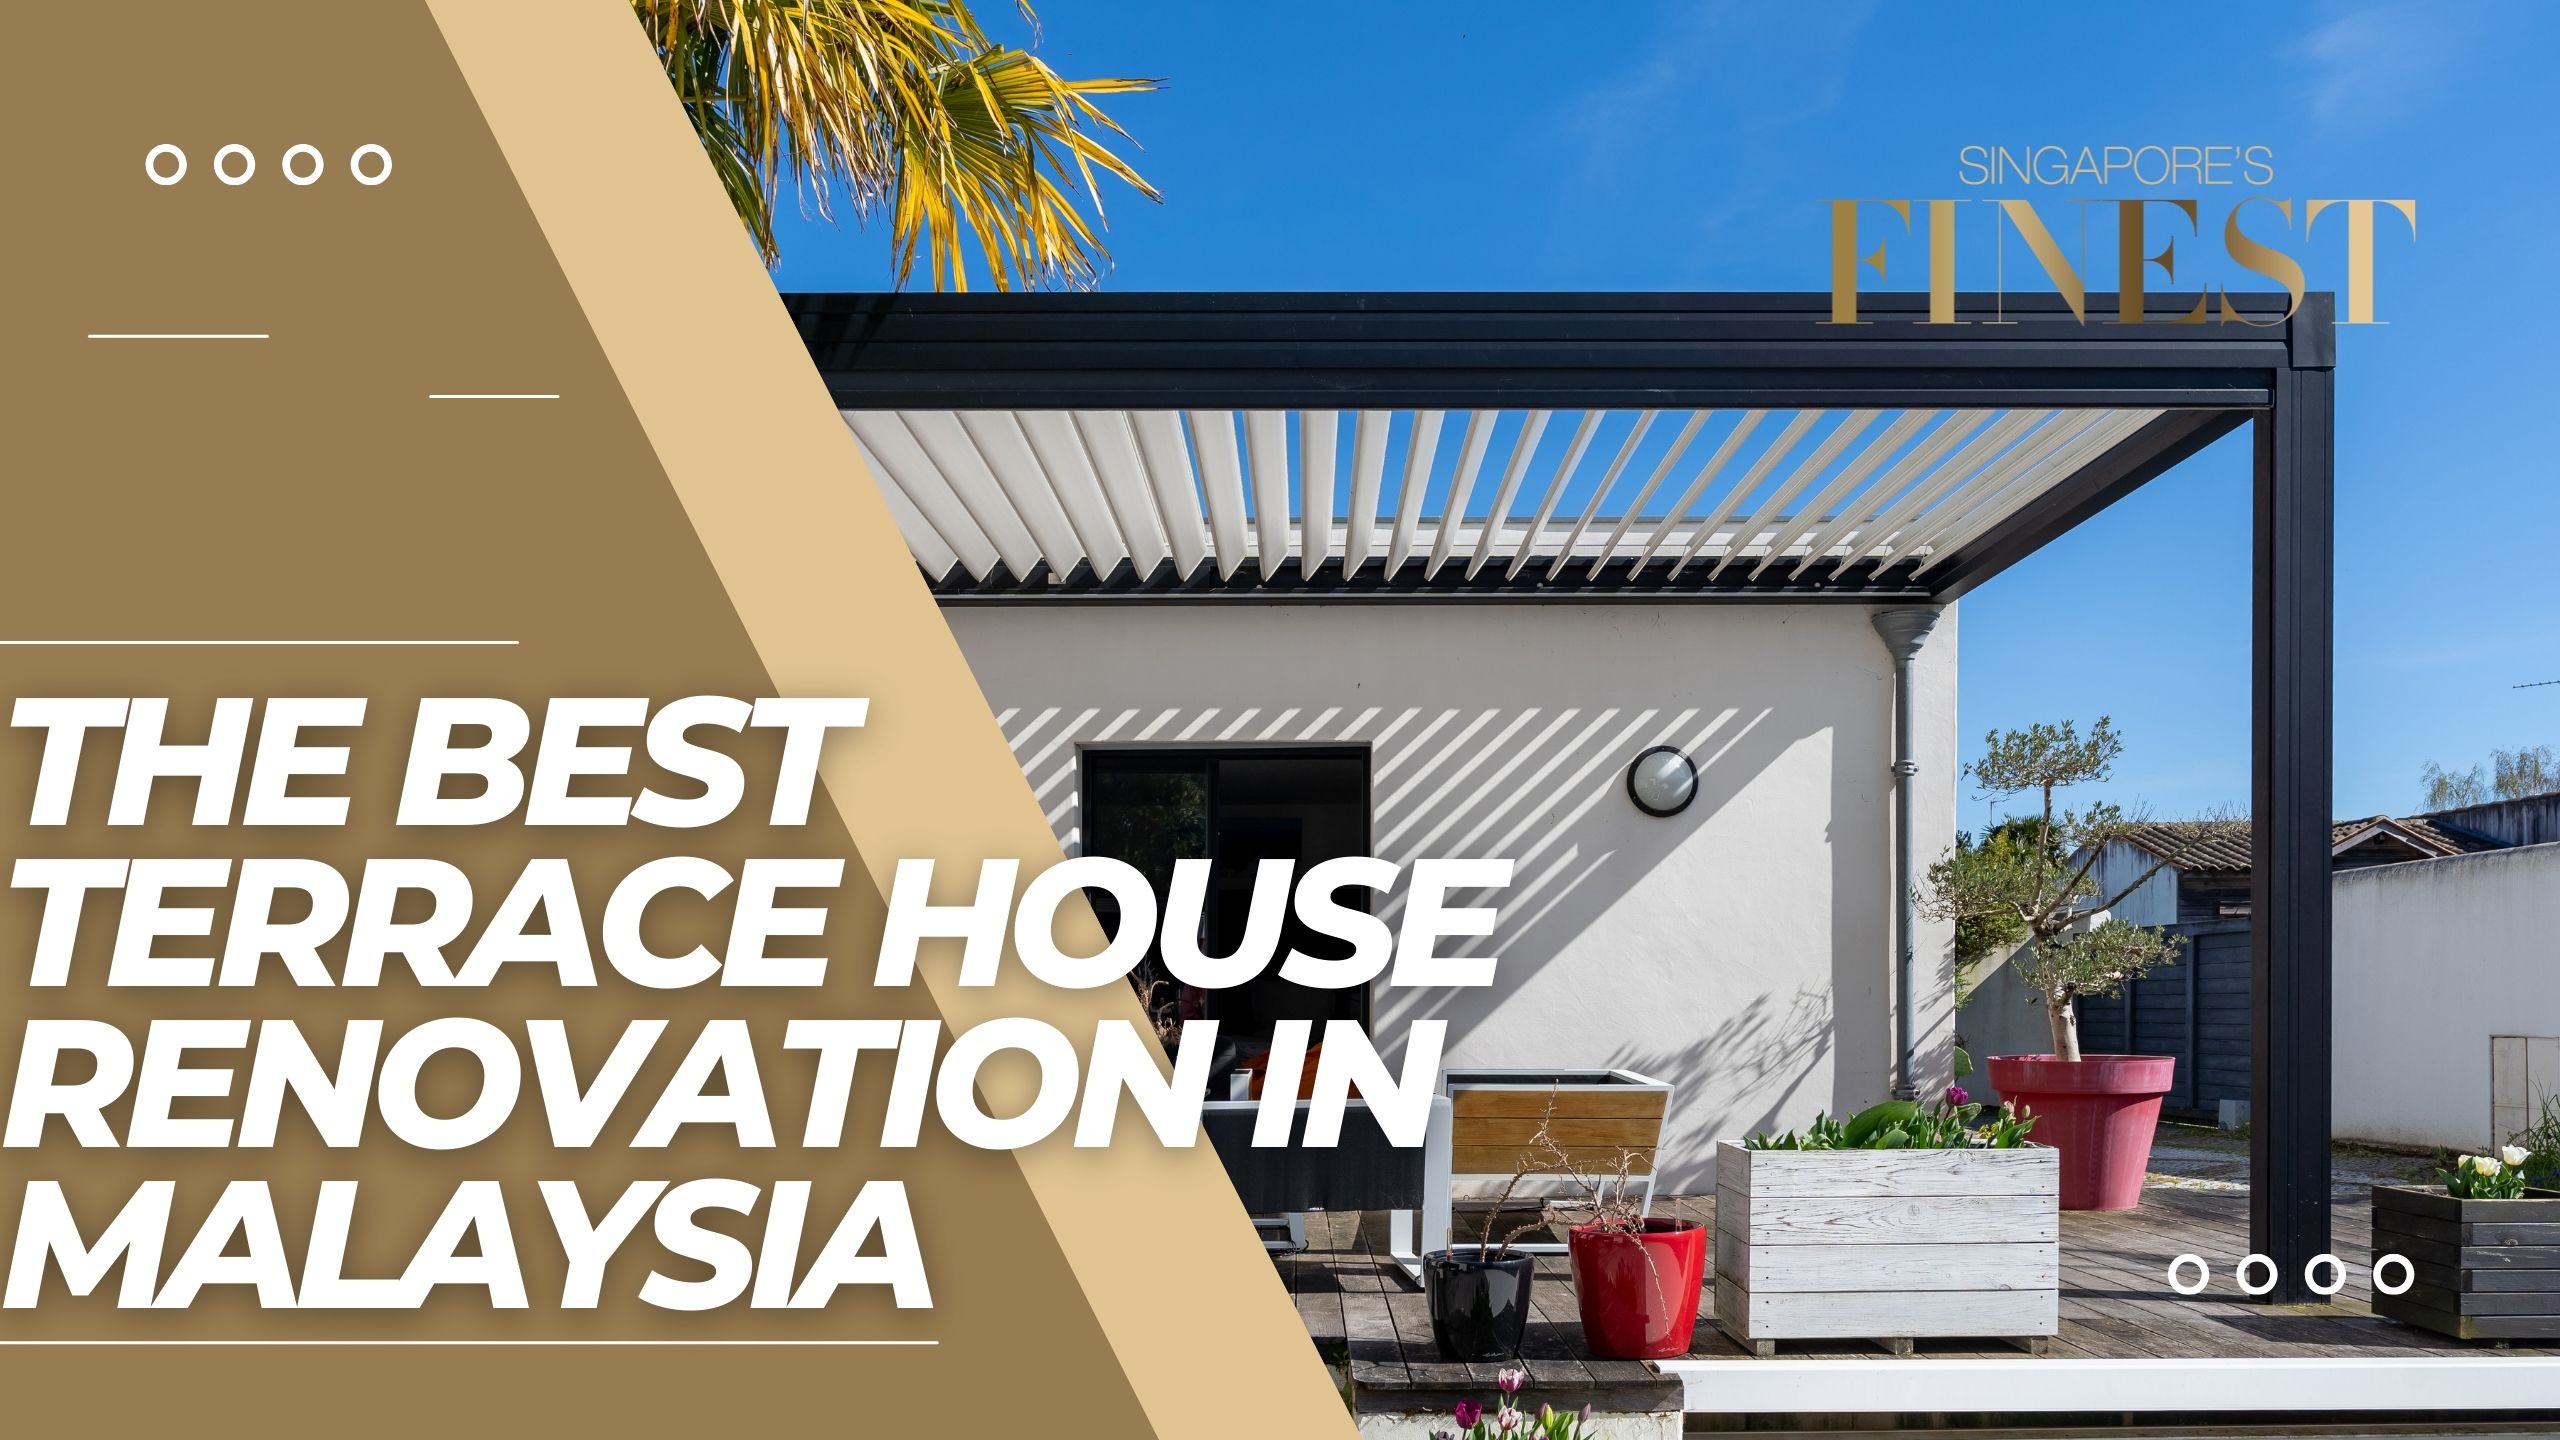 The Finest Terrace House Renovation in Malaysia